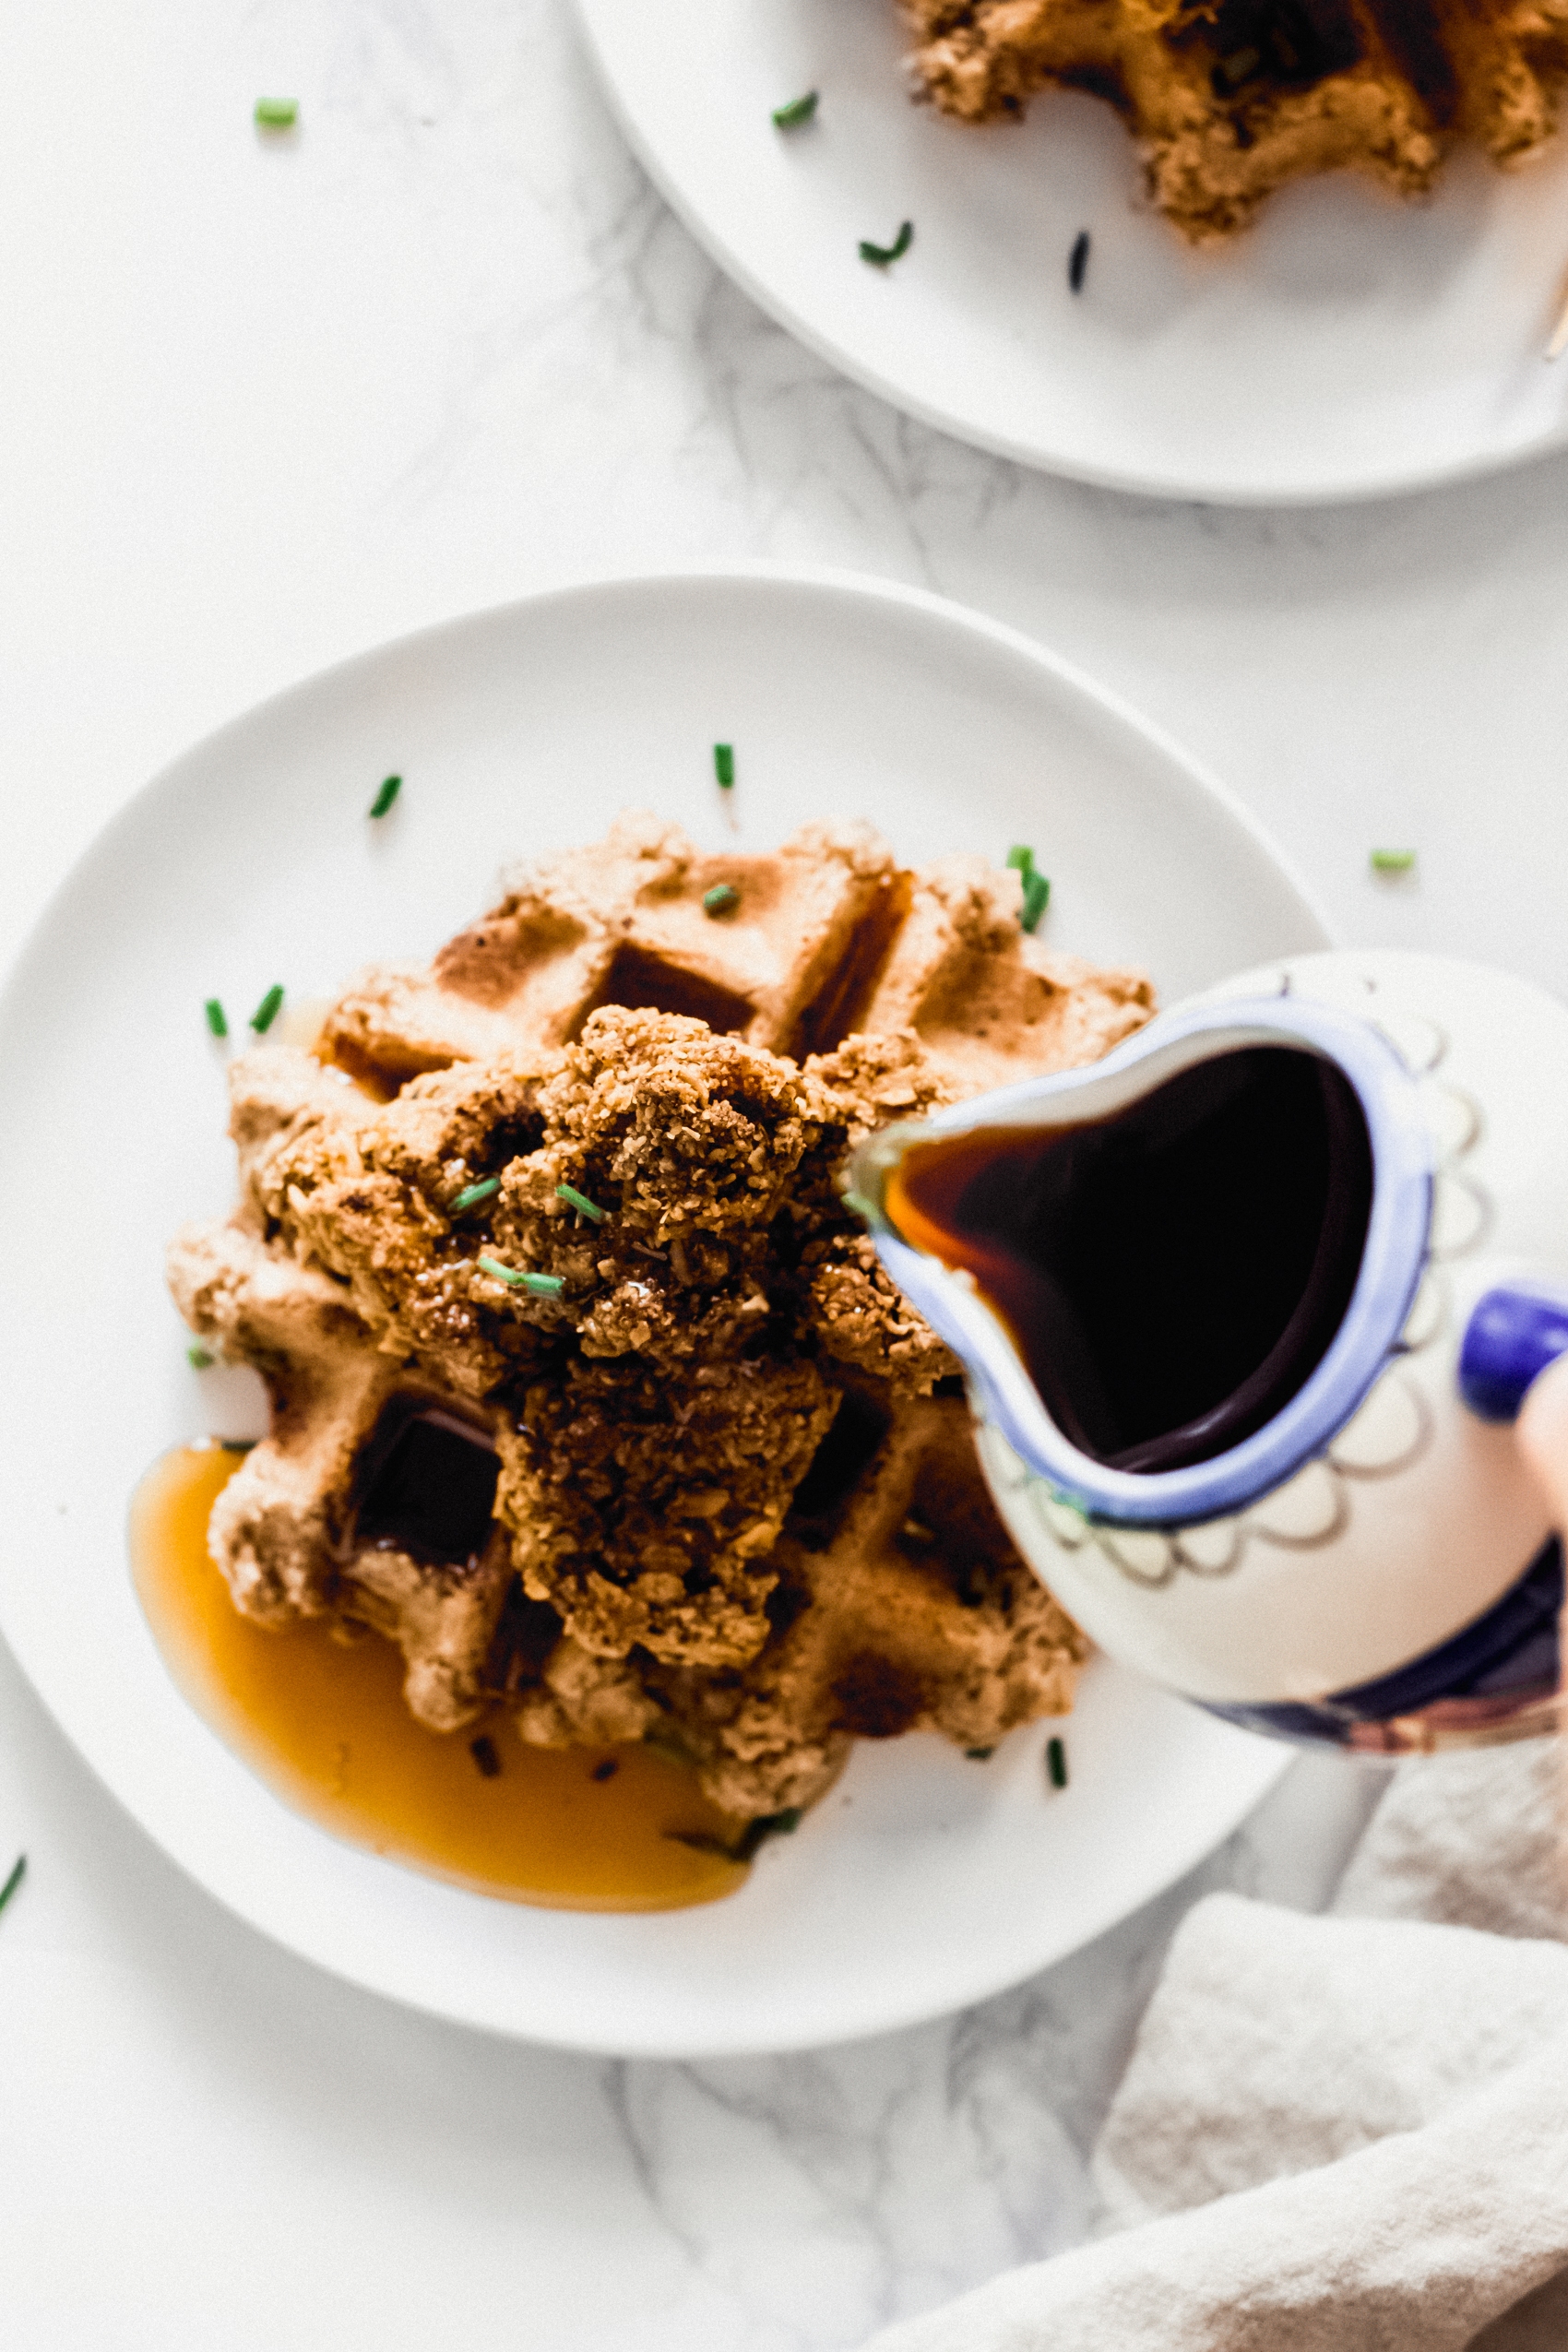 maple syrup being poured onto a stack of vegan chicken and waffles